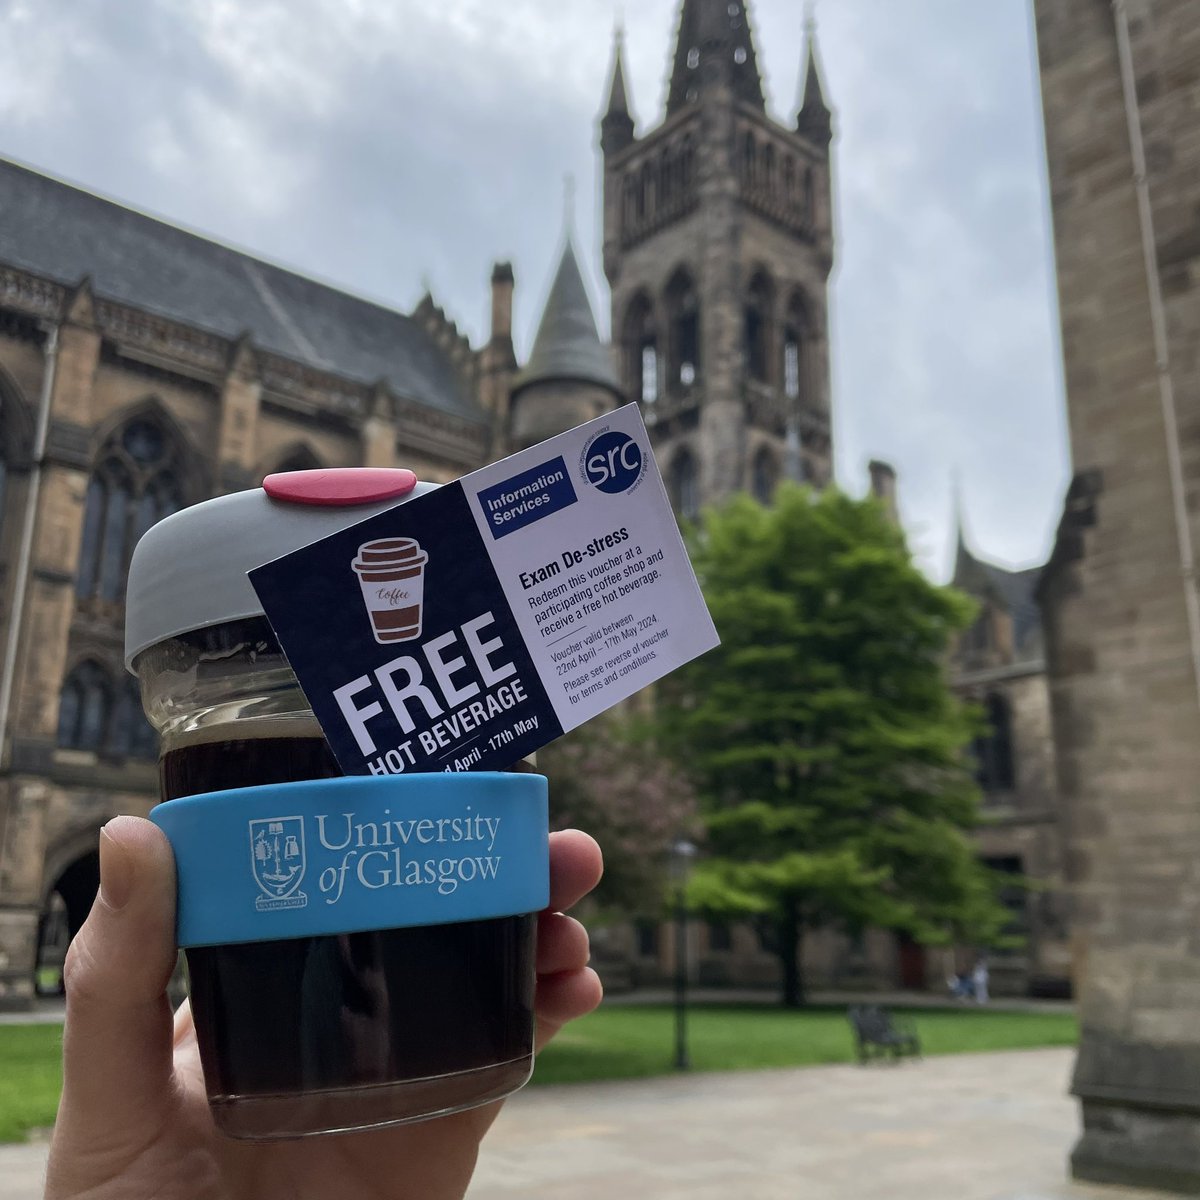 It's the last week of exams 🎉 and the last week to pick up your free hot drink voucher from one of our stalls ☕️ Find us in the JMS, ground floor: today (10-12), Wednesday (10-12) and Friday (10-12). #ExamDestress @UofGlasgow